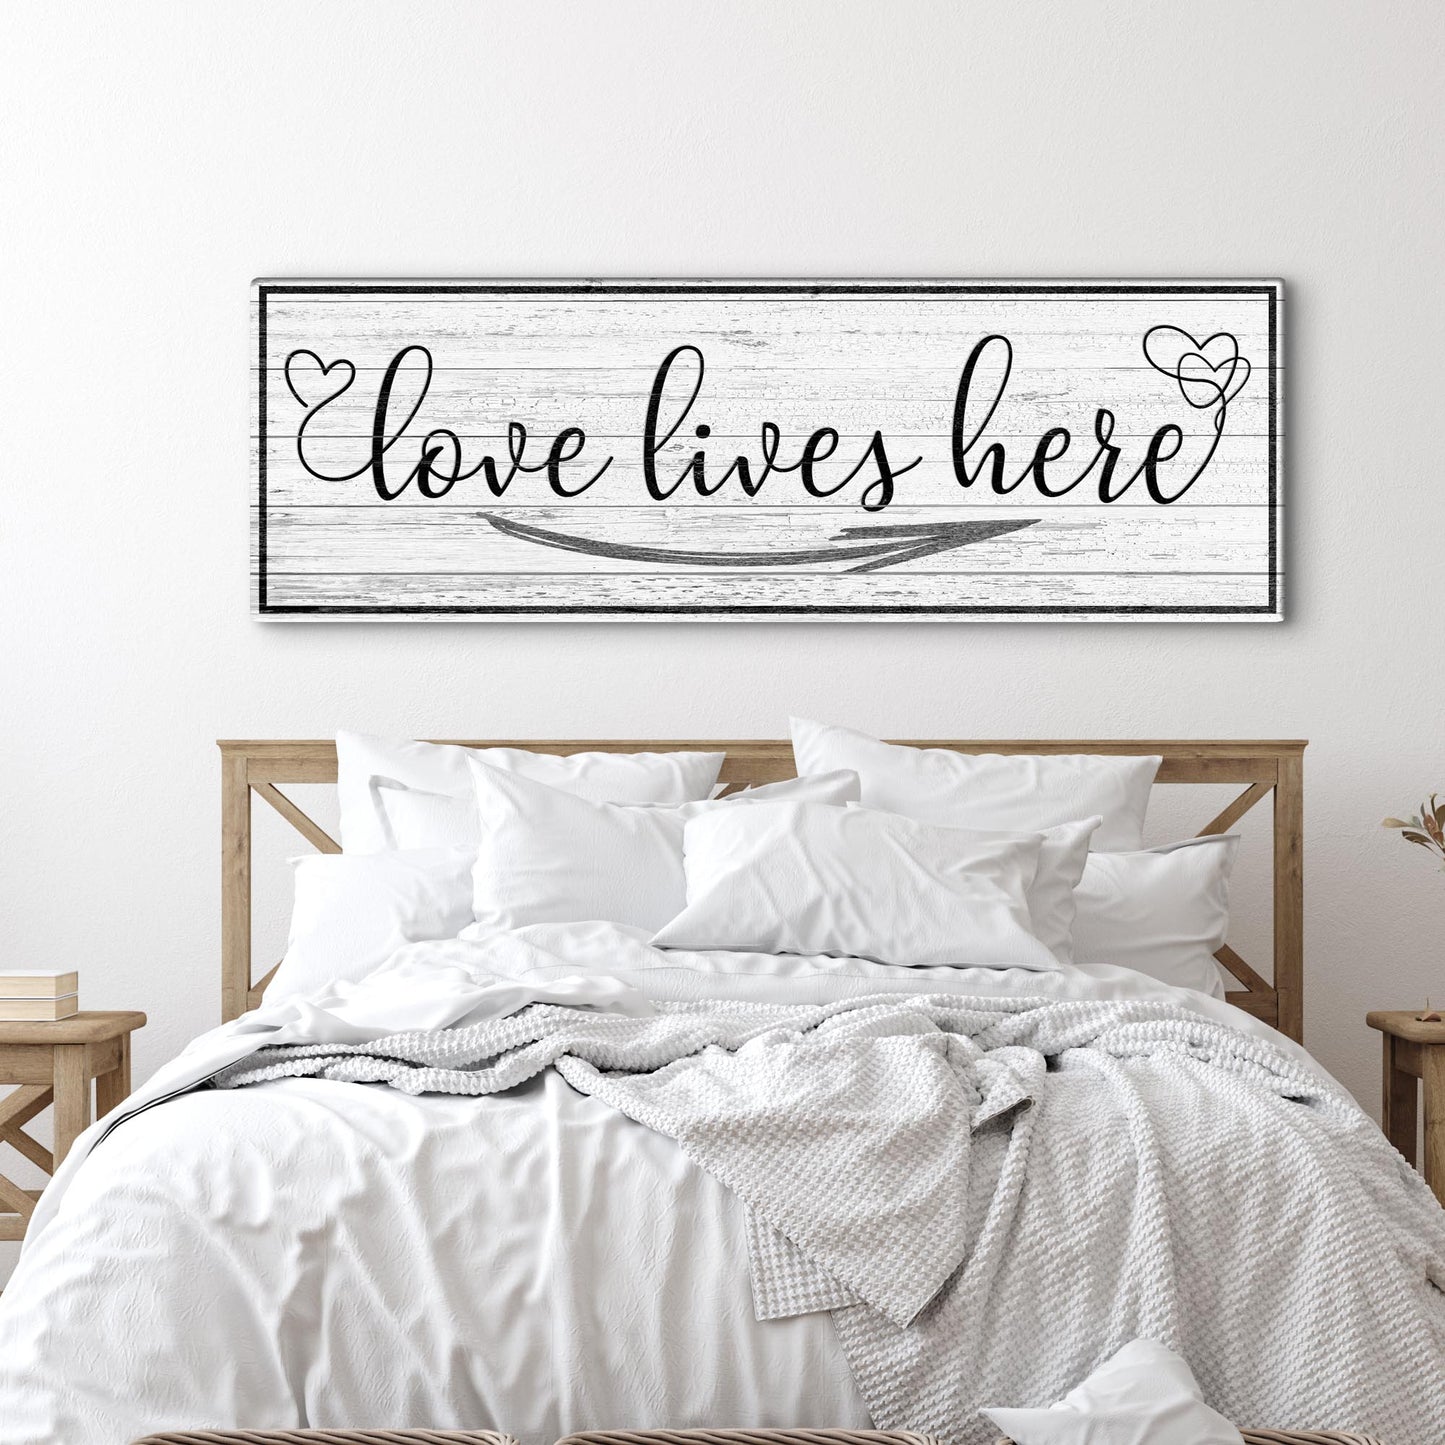 Love Lives Here Sign - Image by Tailored Canvases